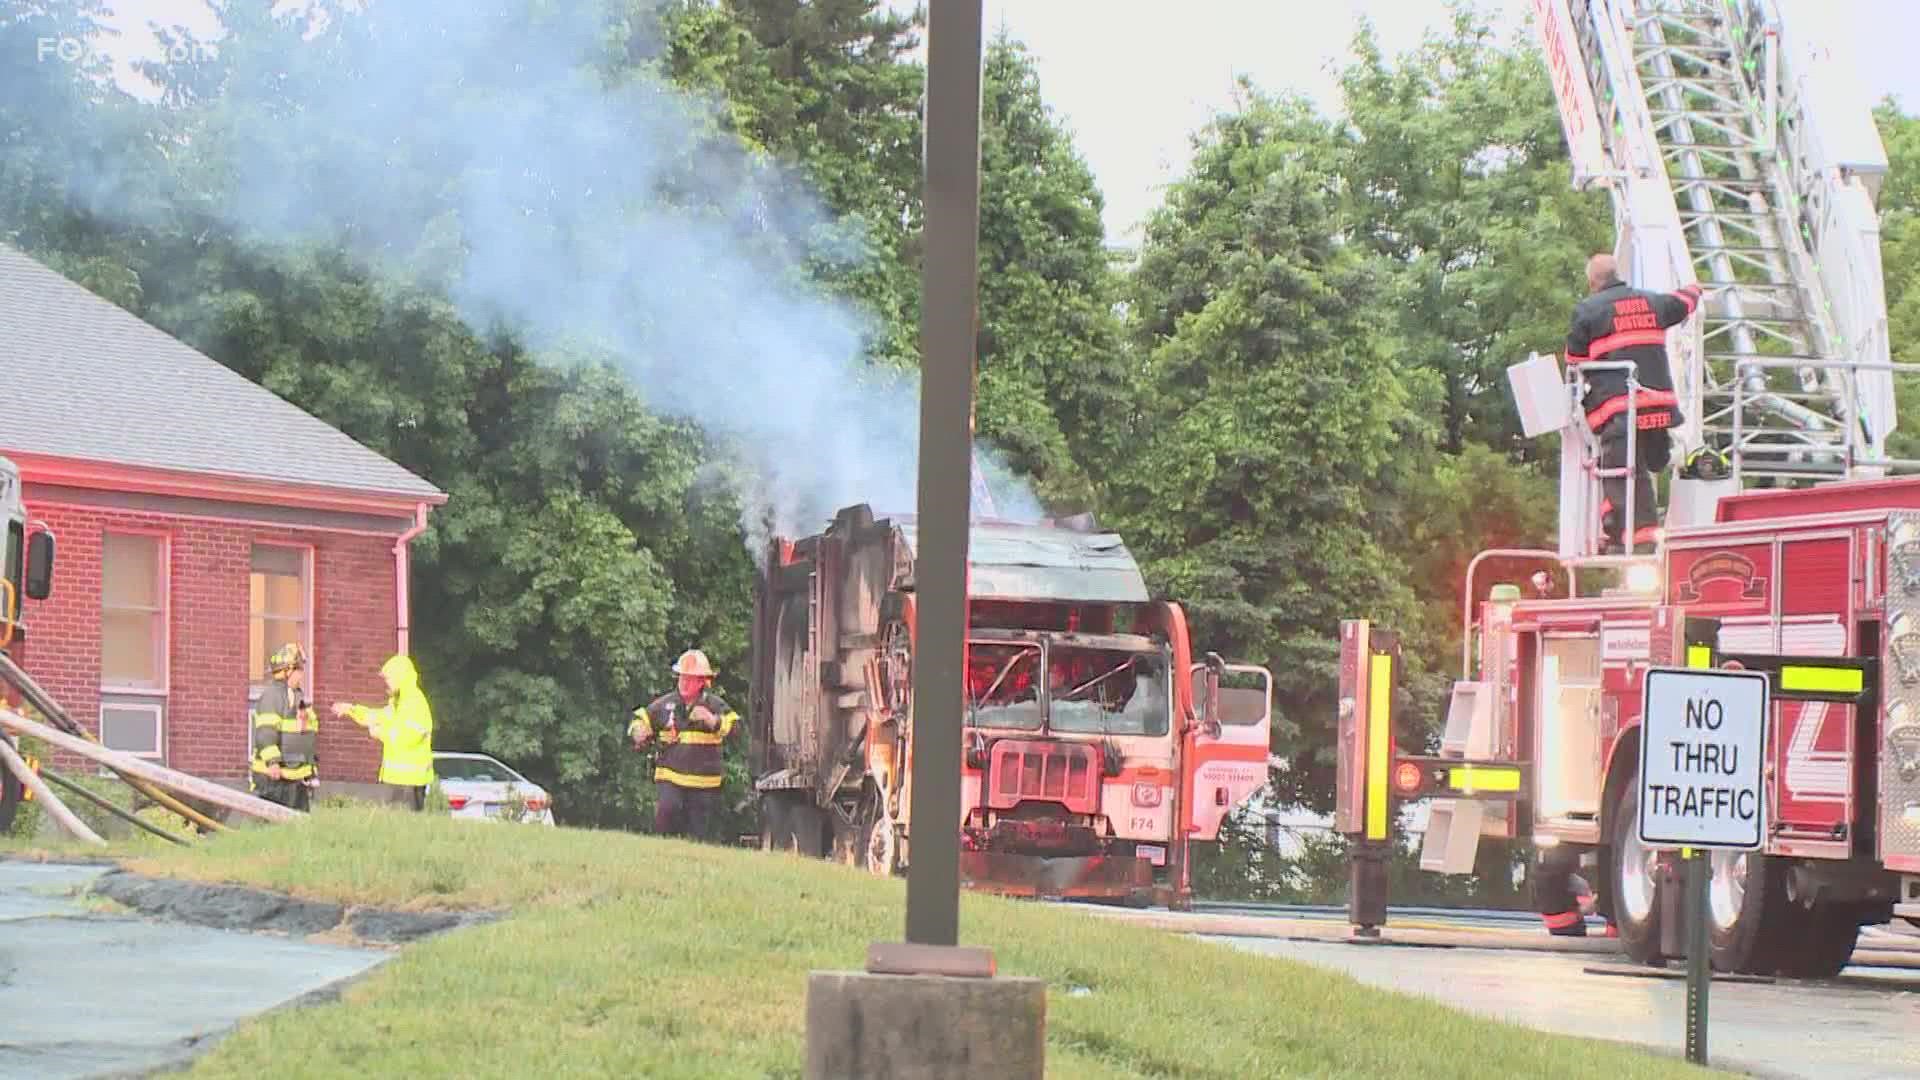 Officials said the concern with the fire was making sure the natural gas on the truck did not explode with the flames.